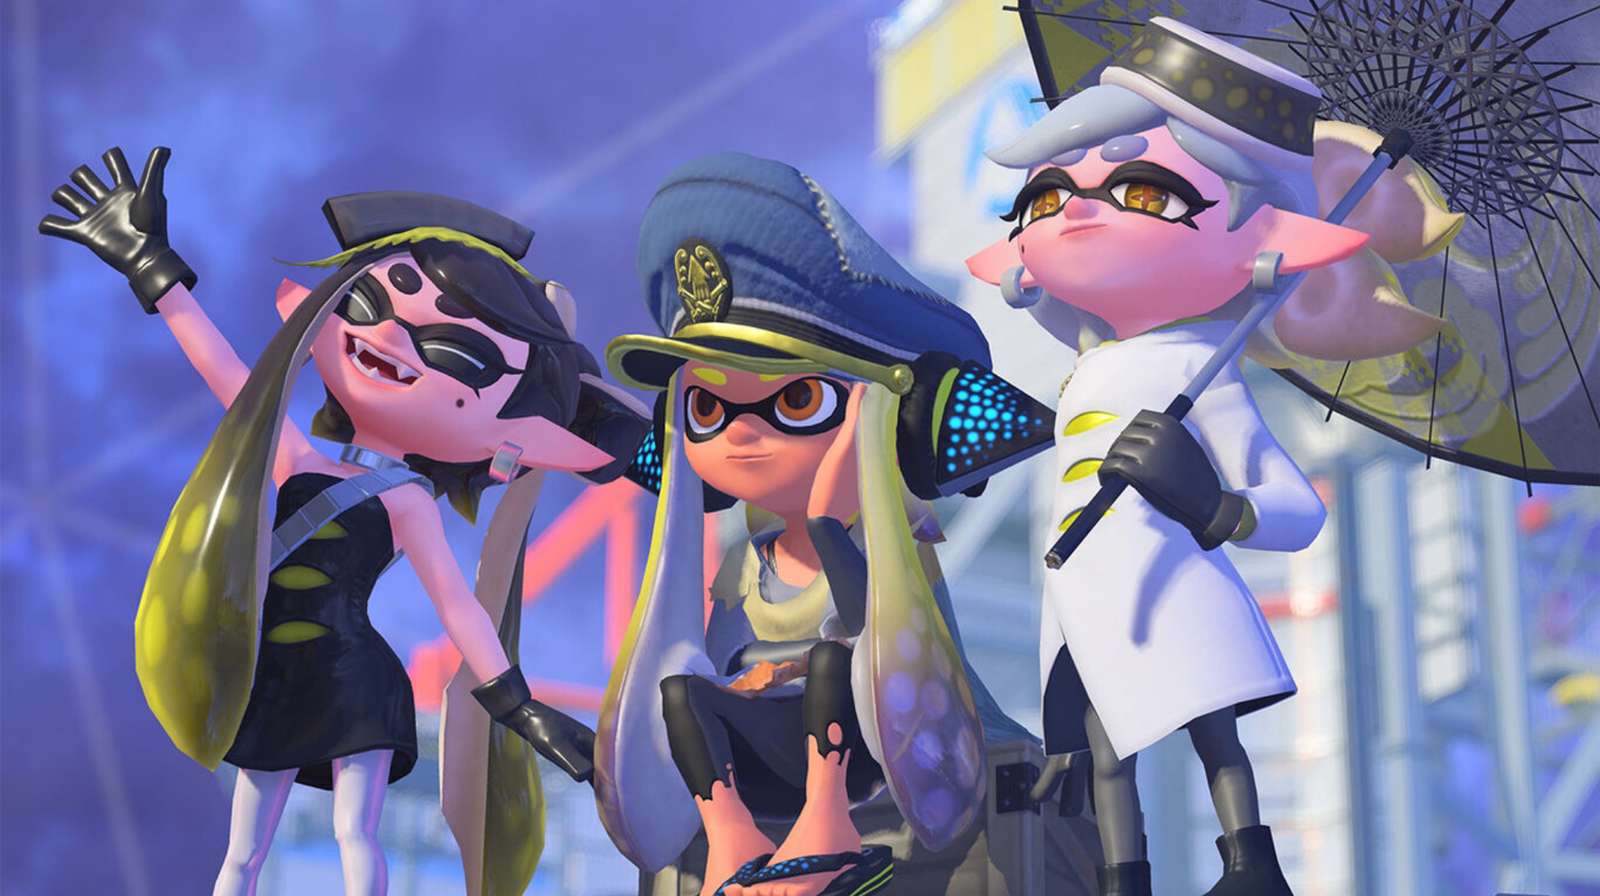 Squid Sisters e il capitano Inkling puzzle online